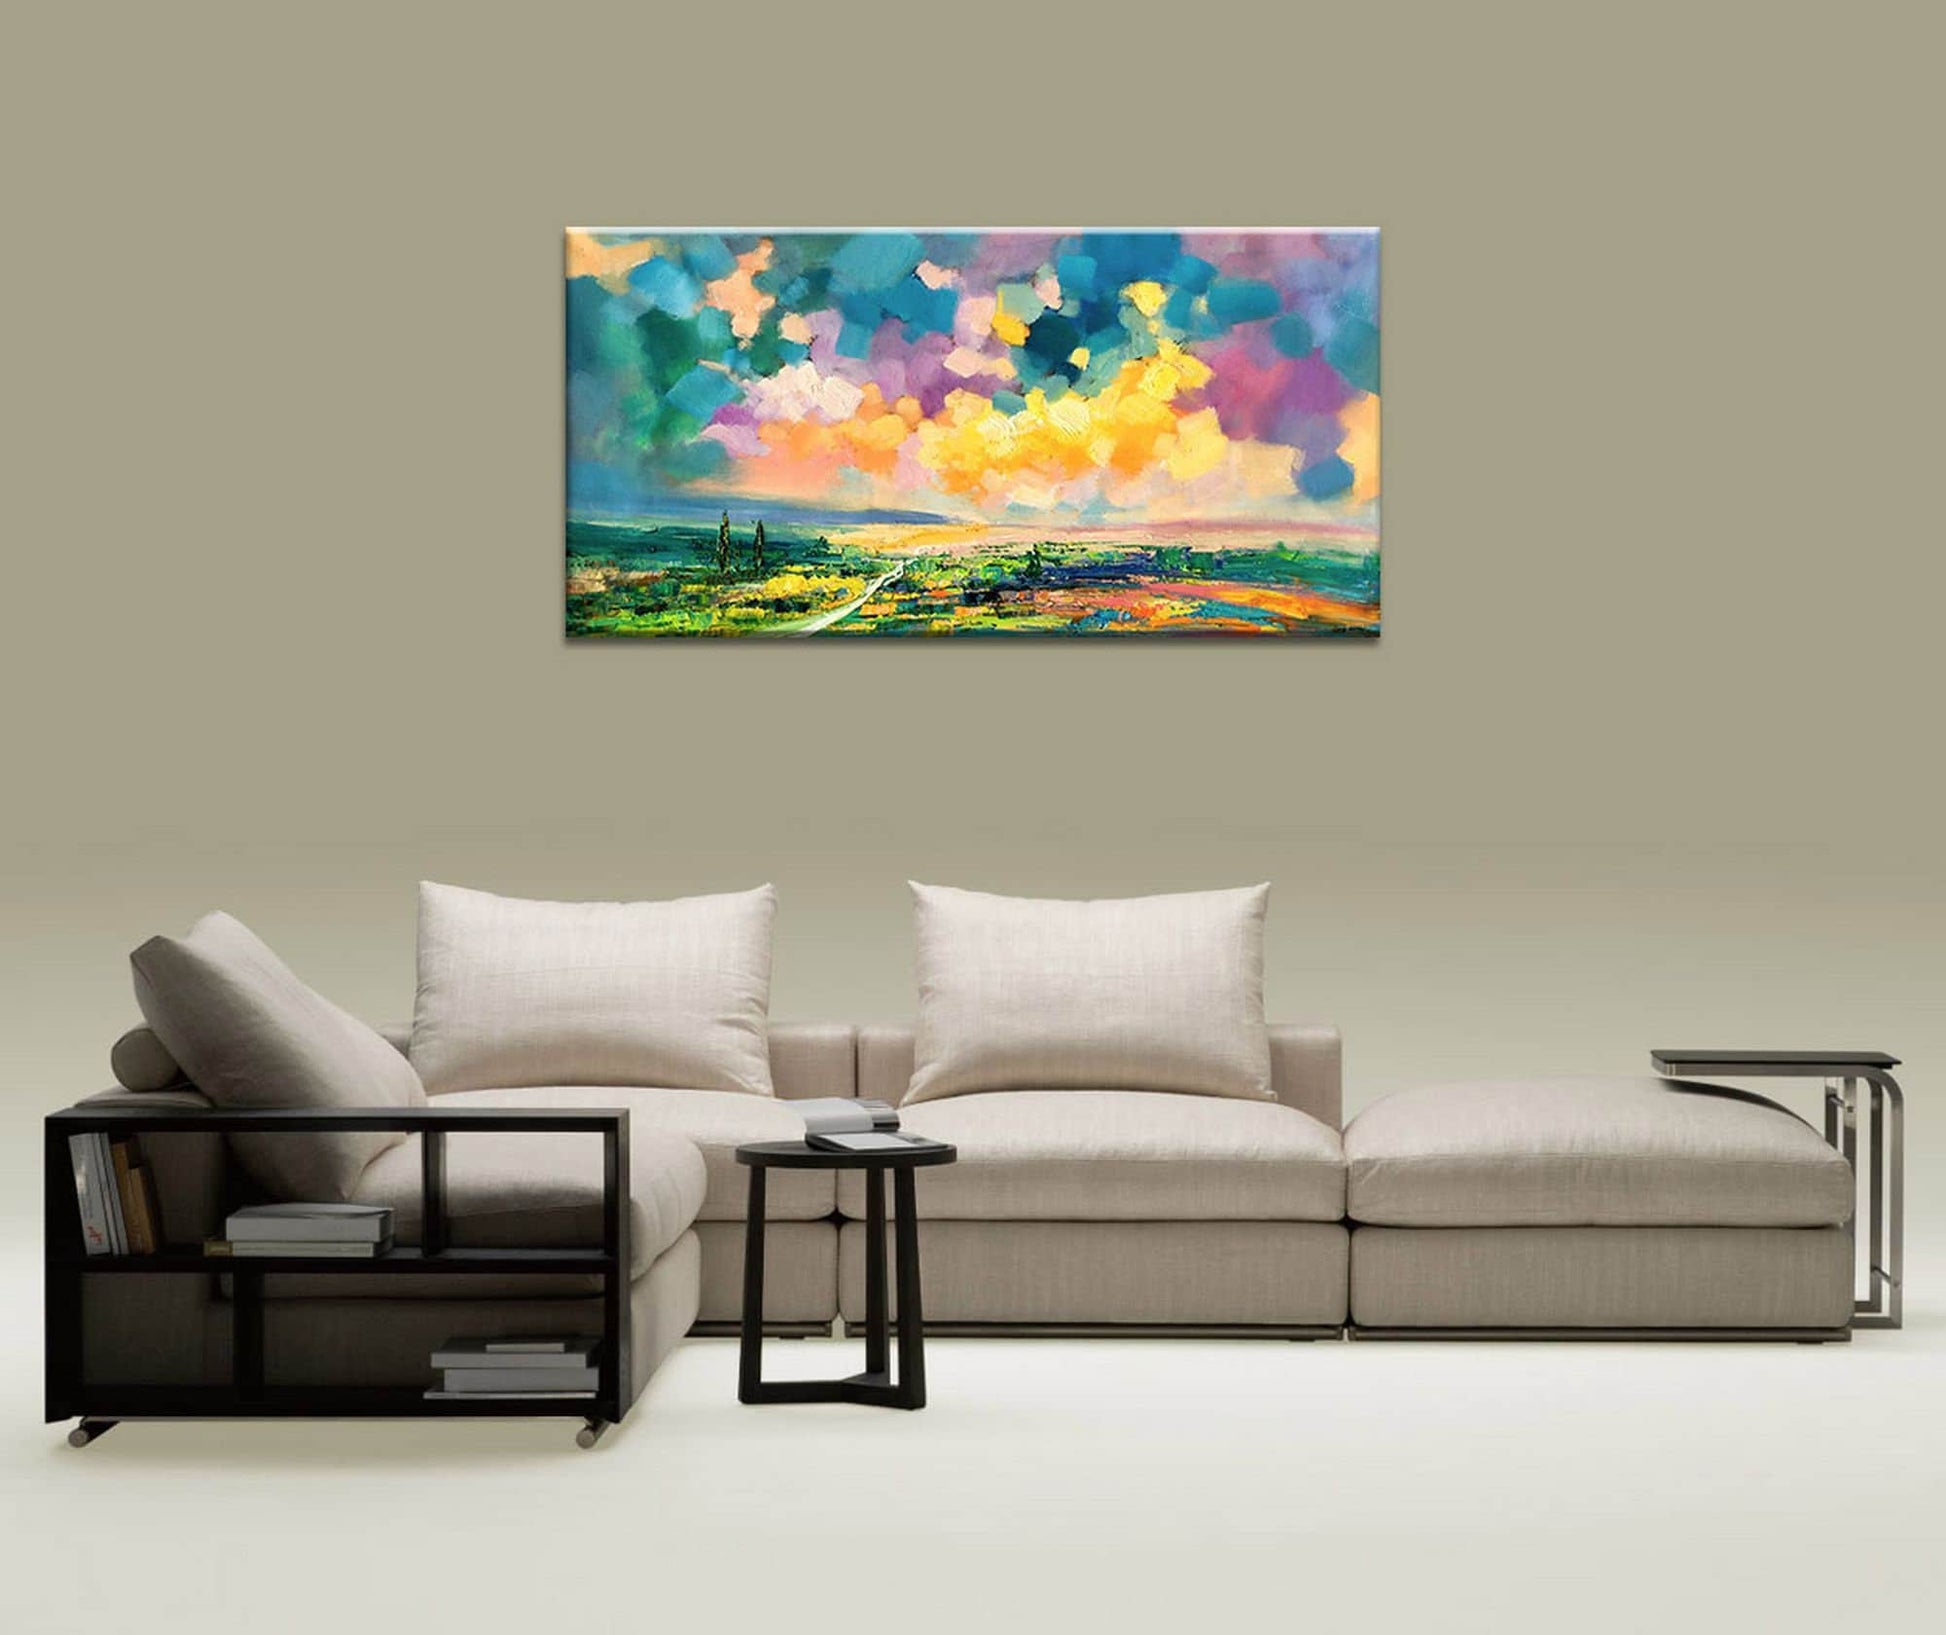 Landscape Painting, Oil Painting Original, Modern Painting, Bedroom Art, Large Wall Art Canvas, Canvas Painting, Large Canvas Painting